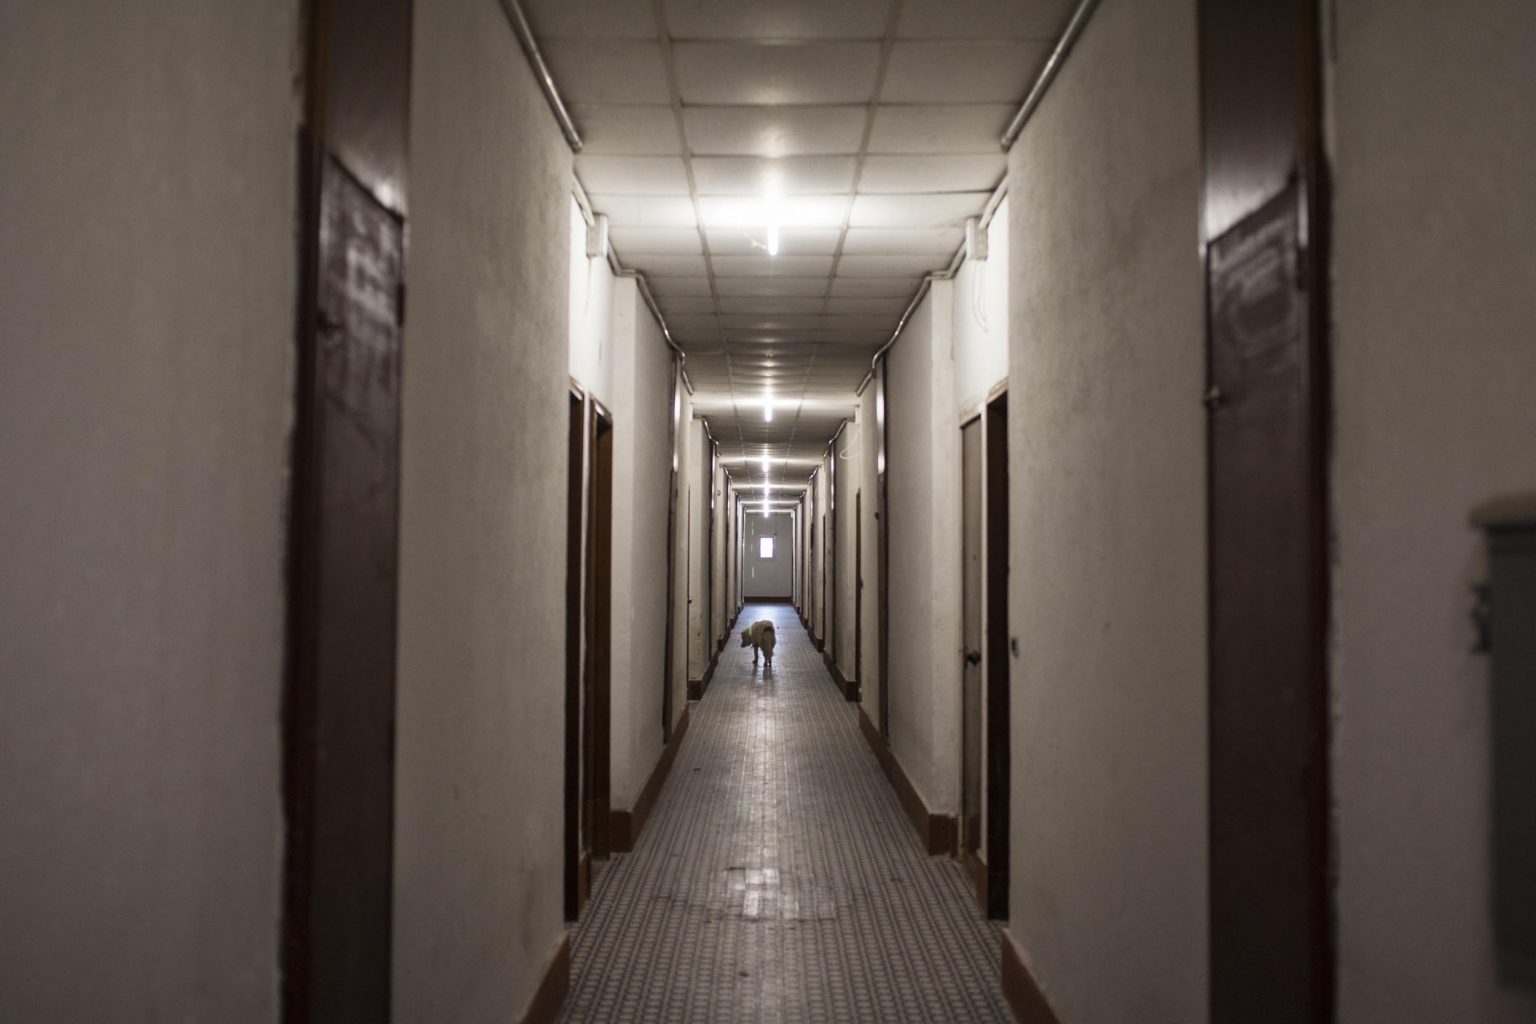 Claudia lost her son. On the 7th of October 2014 on the verge of one of their umpteenth fight Emiliano left with their three months son, hiding him for days from her. She immediately claimed custody of him.
In this picture the hallway of the residence building in the Coppola village where she decided to move with a regular rent contract In order to have the best chances to win custody of her son but worsening her economic instability.